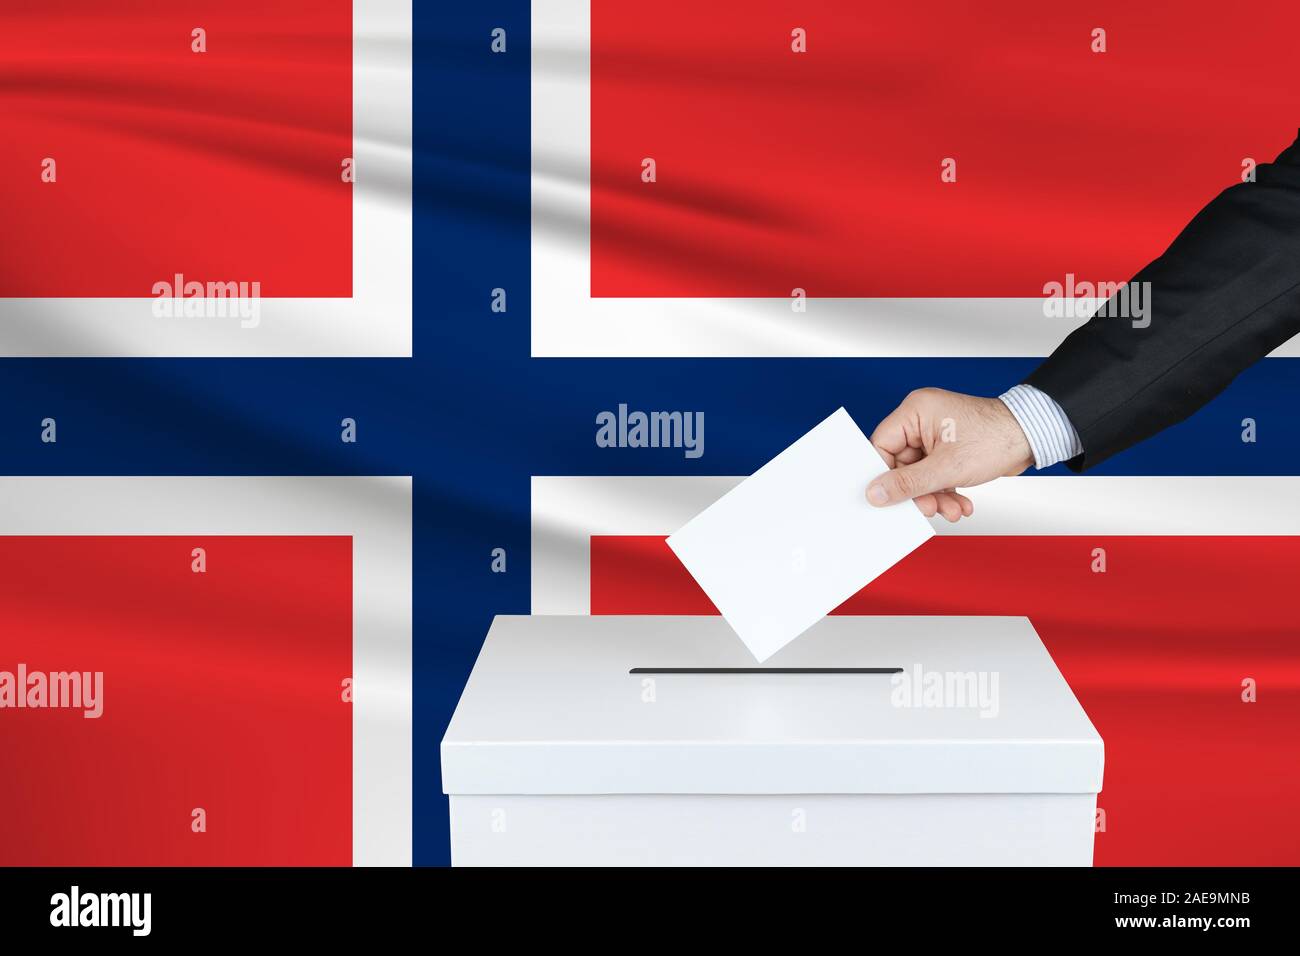 Election in Norway. The hand of man putting his vote in the ballot box. Waved Norway flag on background. Stock Photo